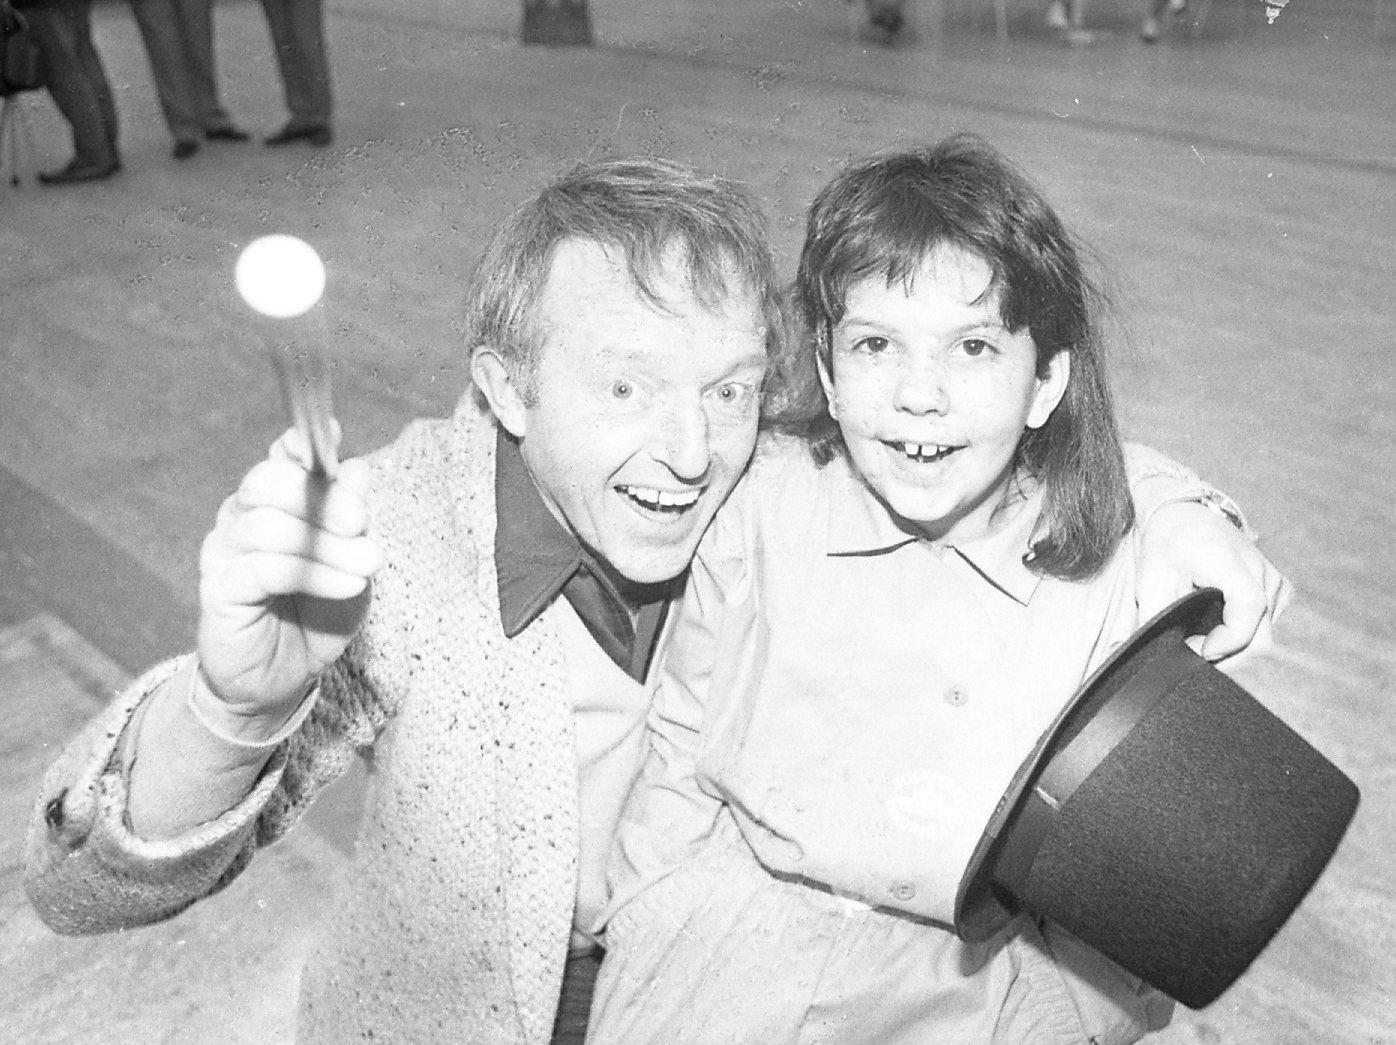 A record-breaking 1,300 magicians converged on Blackpool from all over the UK for a special day of illusion and trickery. Top magic man Paul Daniels was among the experts at the resort's Opera House for the convention hosted by Blackpool Magic Club. He is pictured above with eight-year-old Tanya